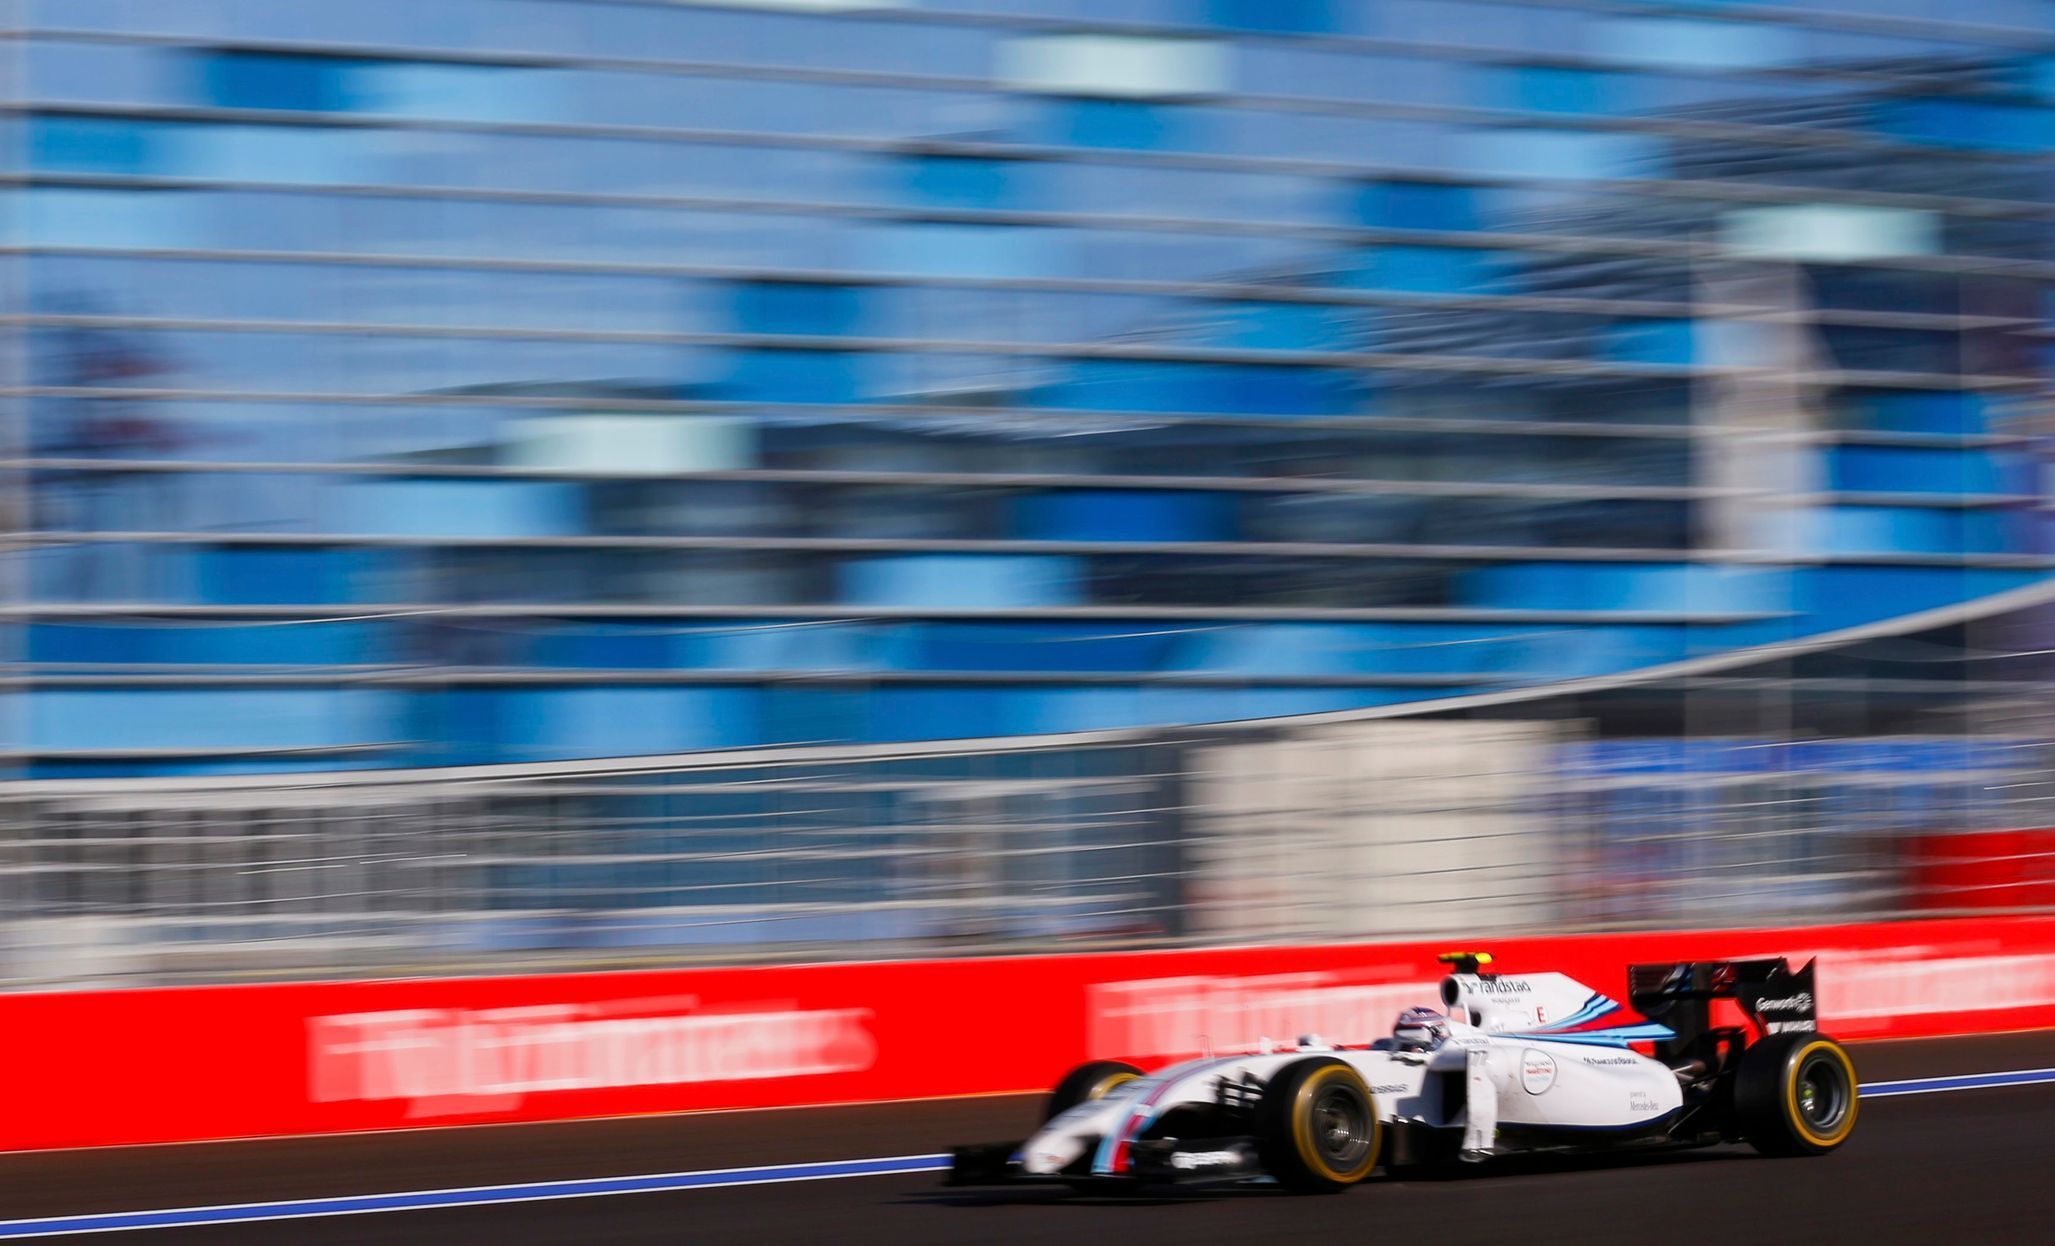 Williams Formula One driver Valtteri Bottas of Finland speeds during the first Russian Grand Prix in Sochi